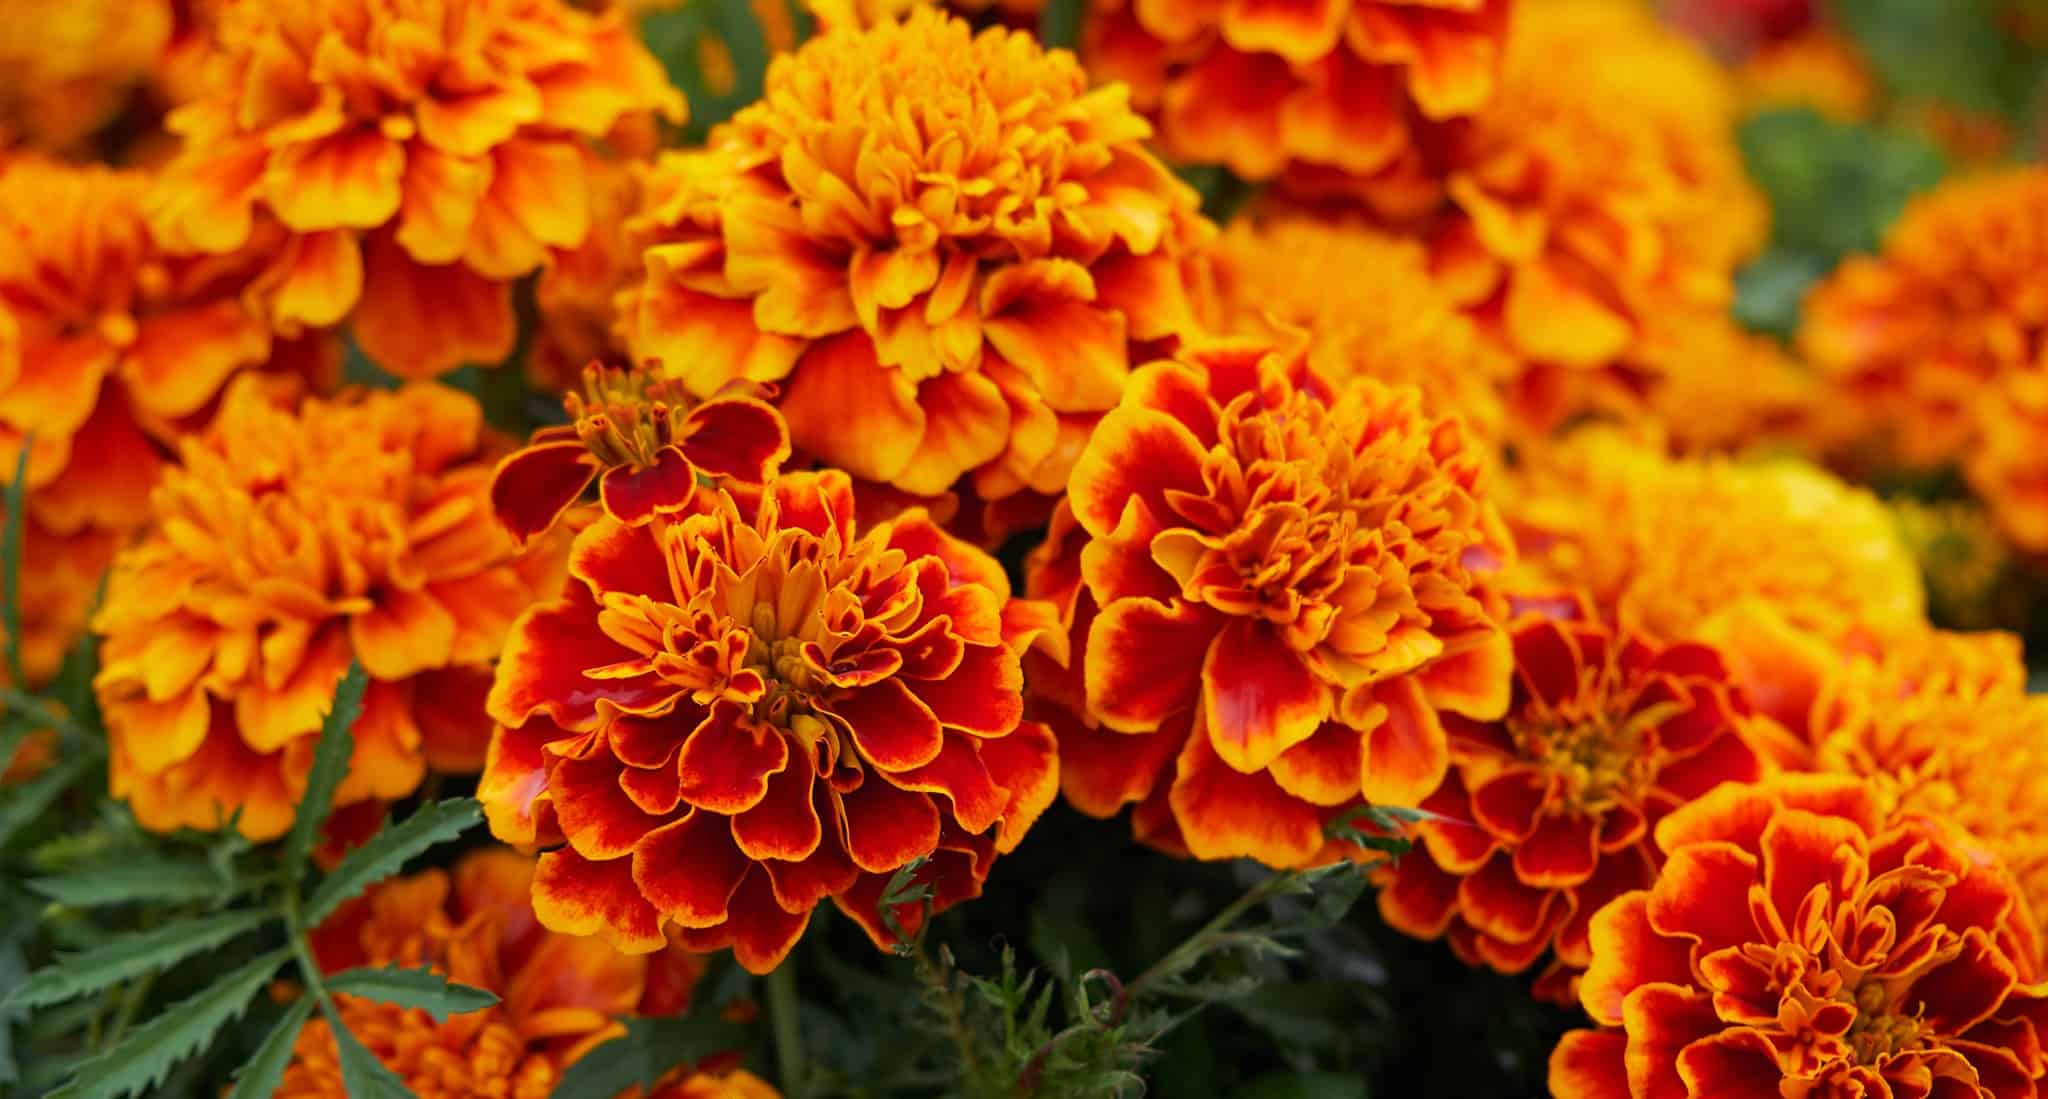 Do Marigolds Repel Mosquitoes? Planting Marigold to Keep Bugs Away